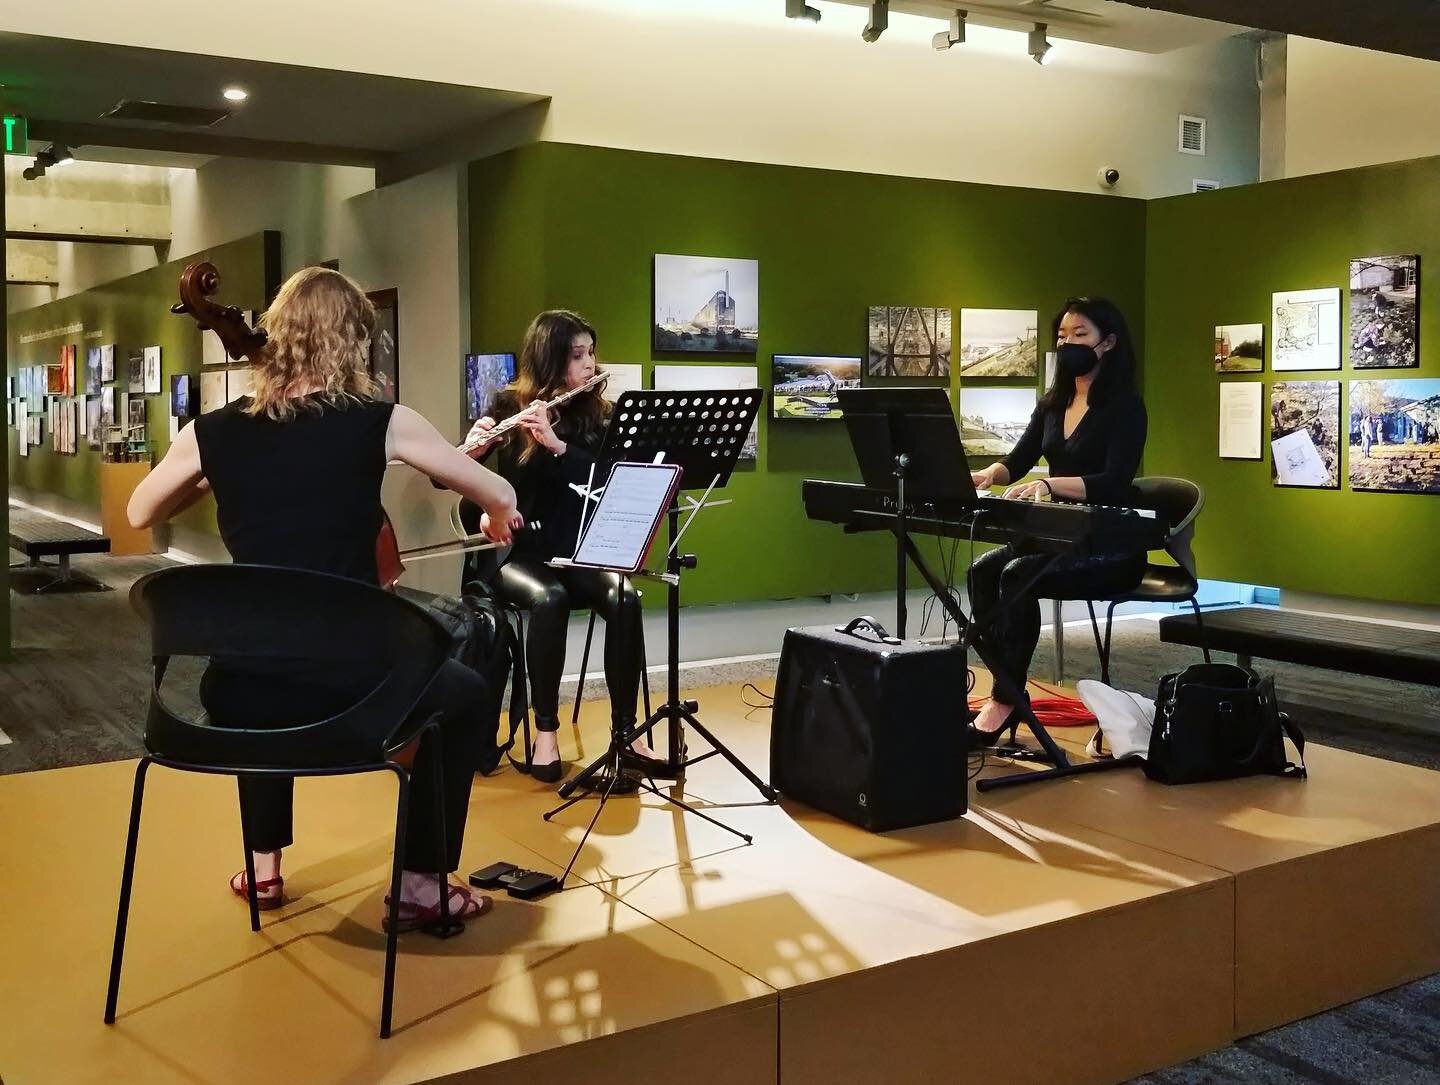 ensemble vim @ the Museum of Design Atlanta, 6.28.22

Thank you so much @modatl for having us! We loved performing a nature-themed program of works by @alicehong__ and Hilary Tann in support of MODA&rsquo;s exhibition: &ldquo;Full Circle: Design With